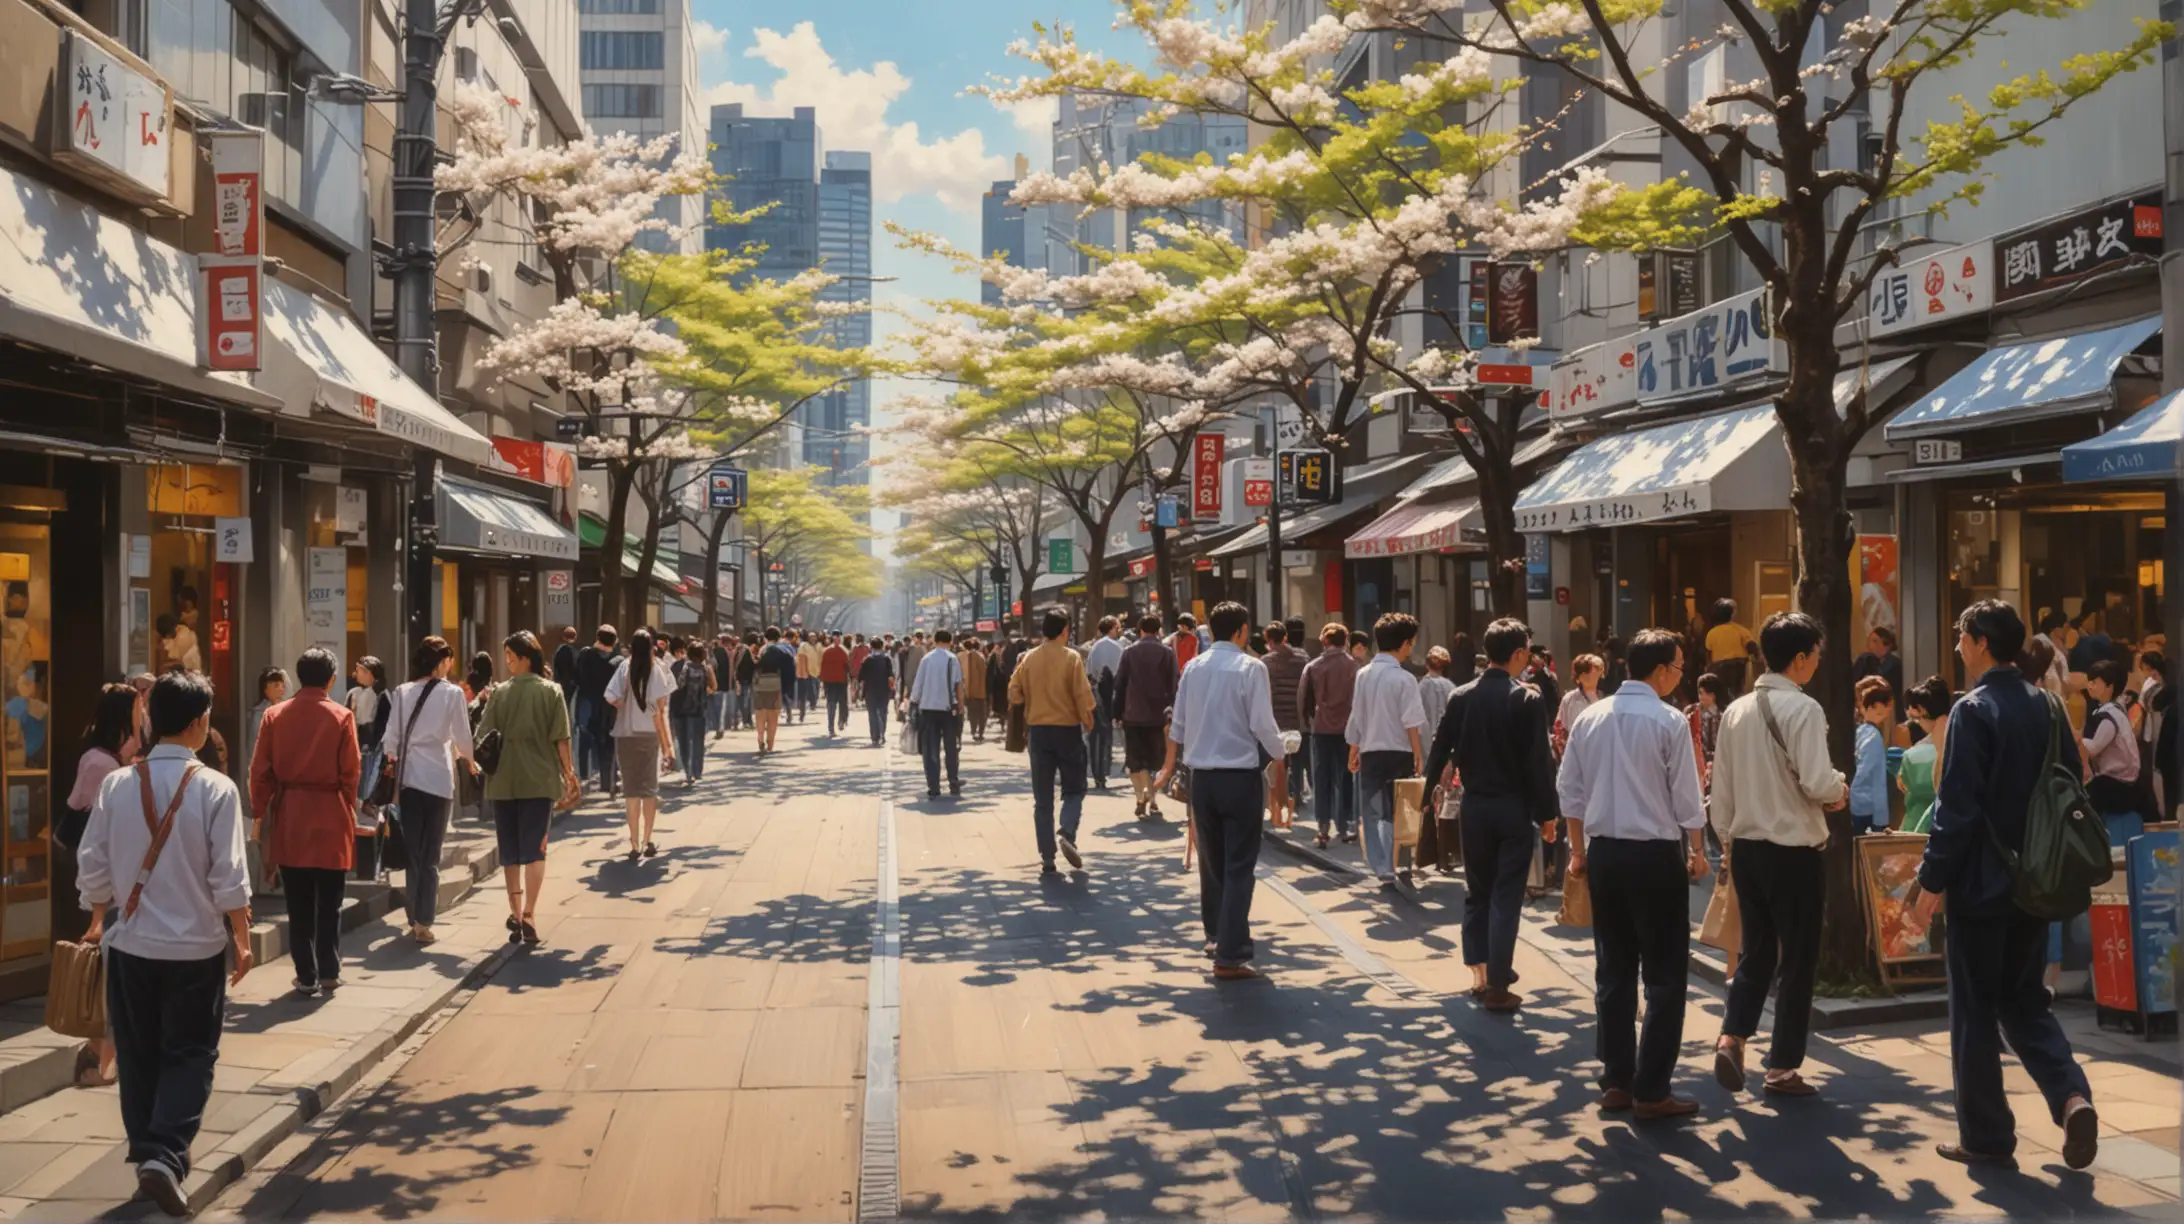 Oil painting of a busy sidewalk during a spring afternoon in tokyo japan with people passing as on a time lapse photography